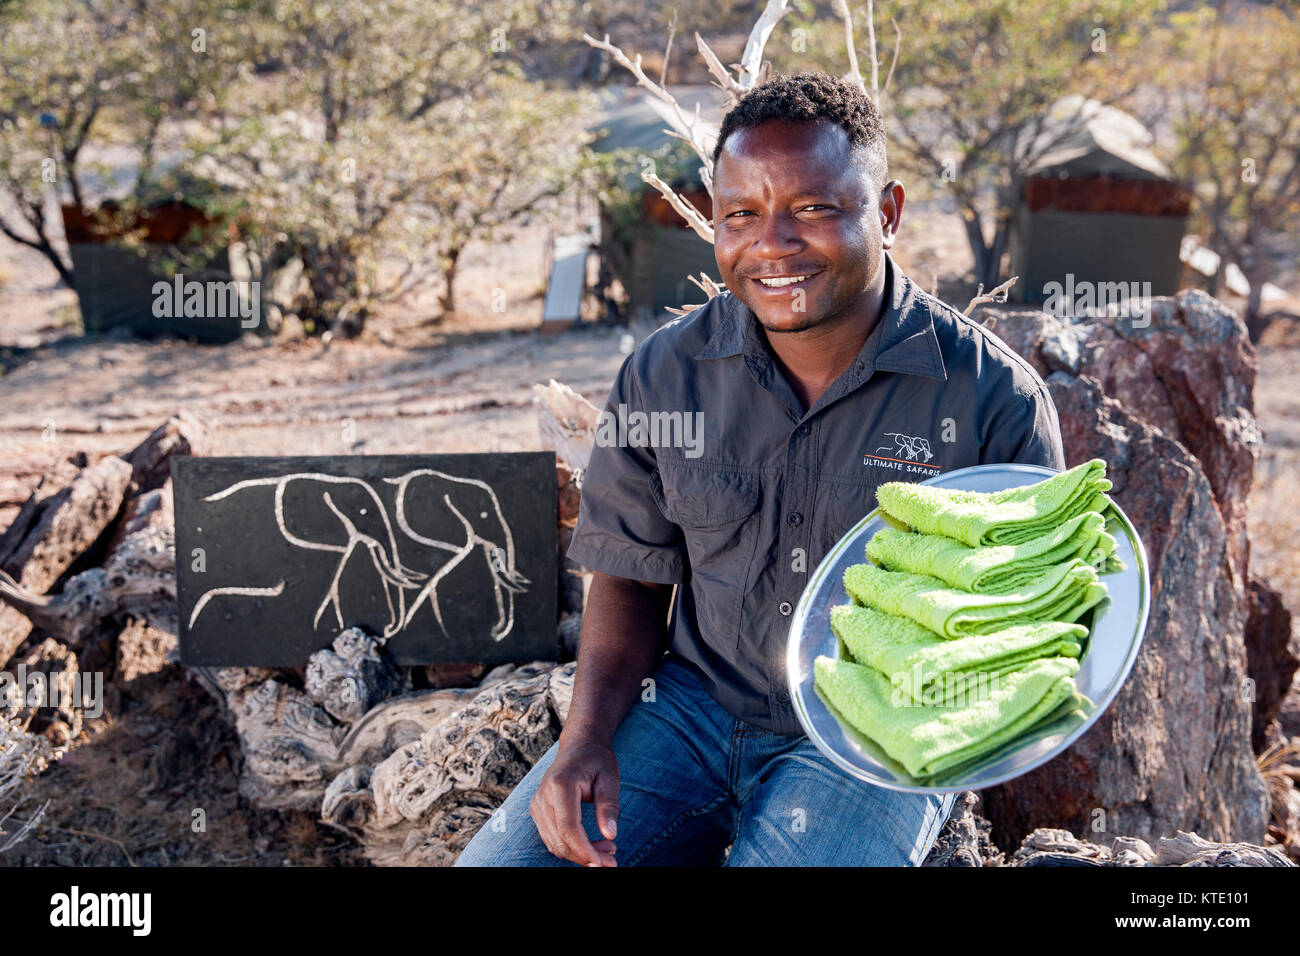 Staff person with refreshing welcome towels - Huab Under Canvas, Damaraland, Namibia, Africa Stock Photo